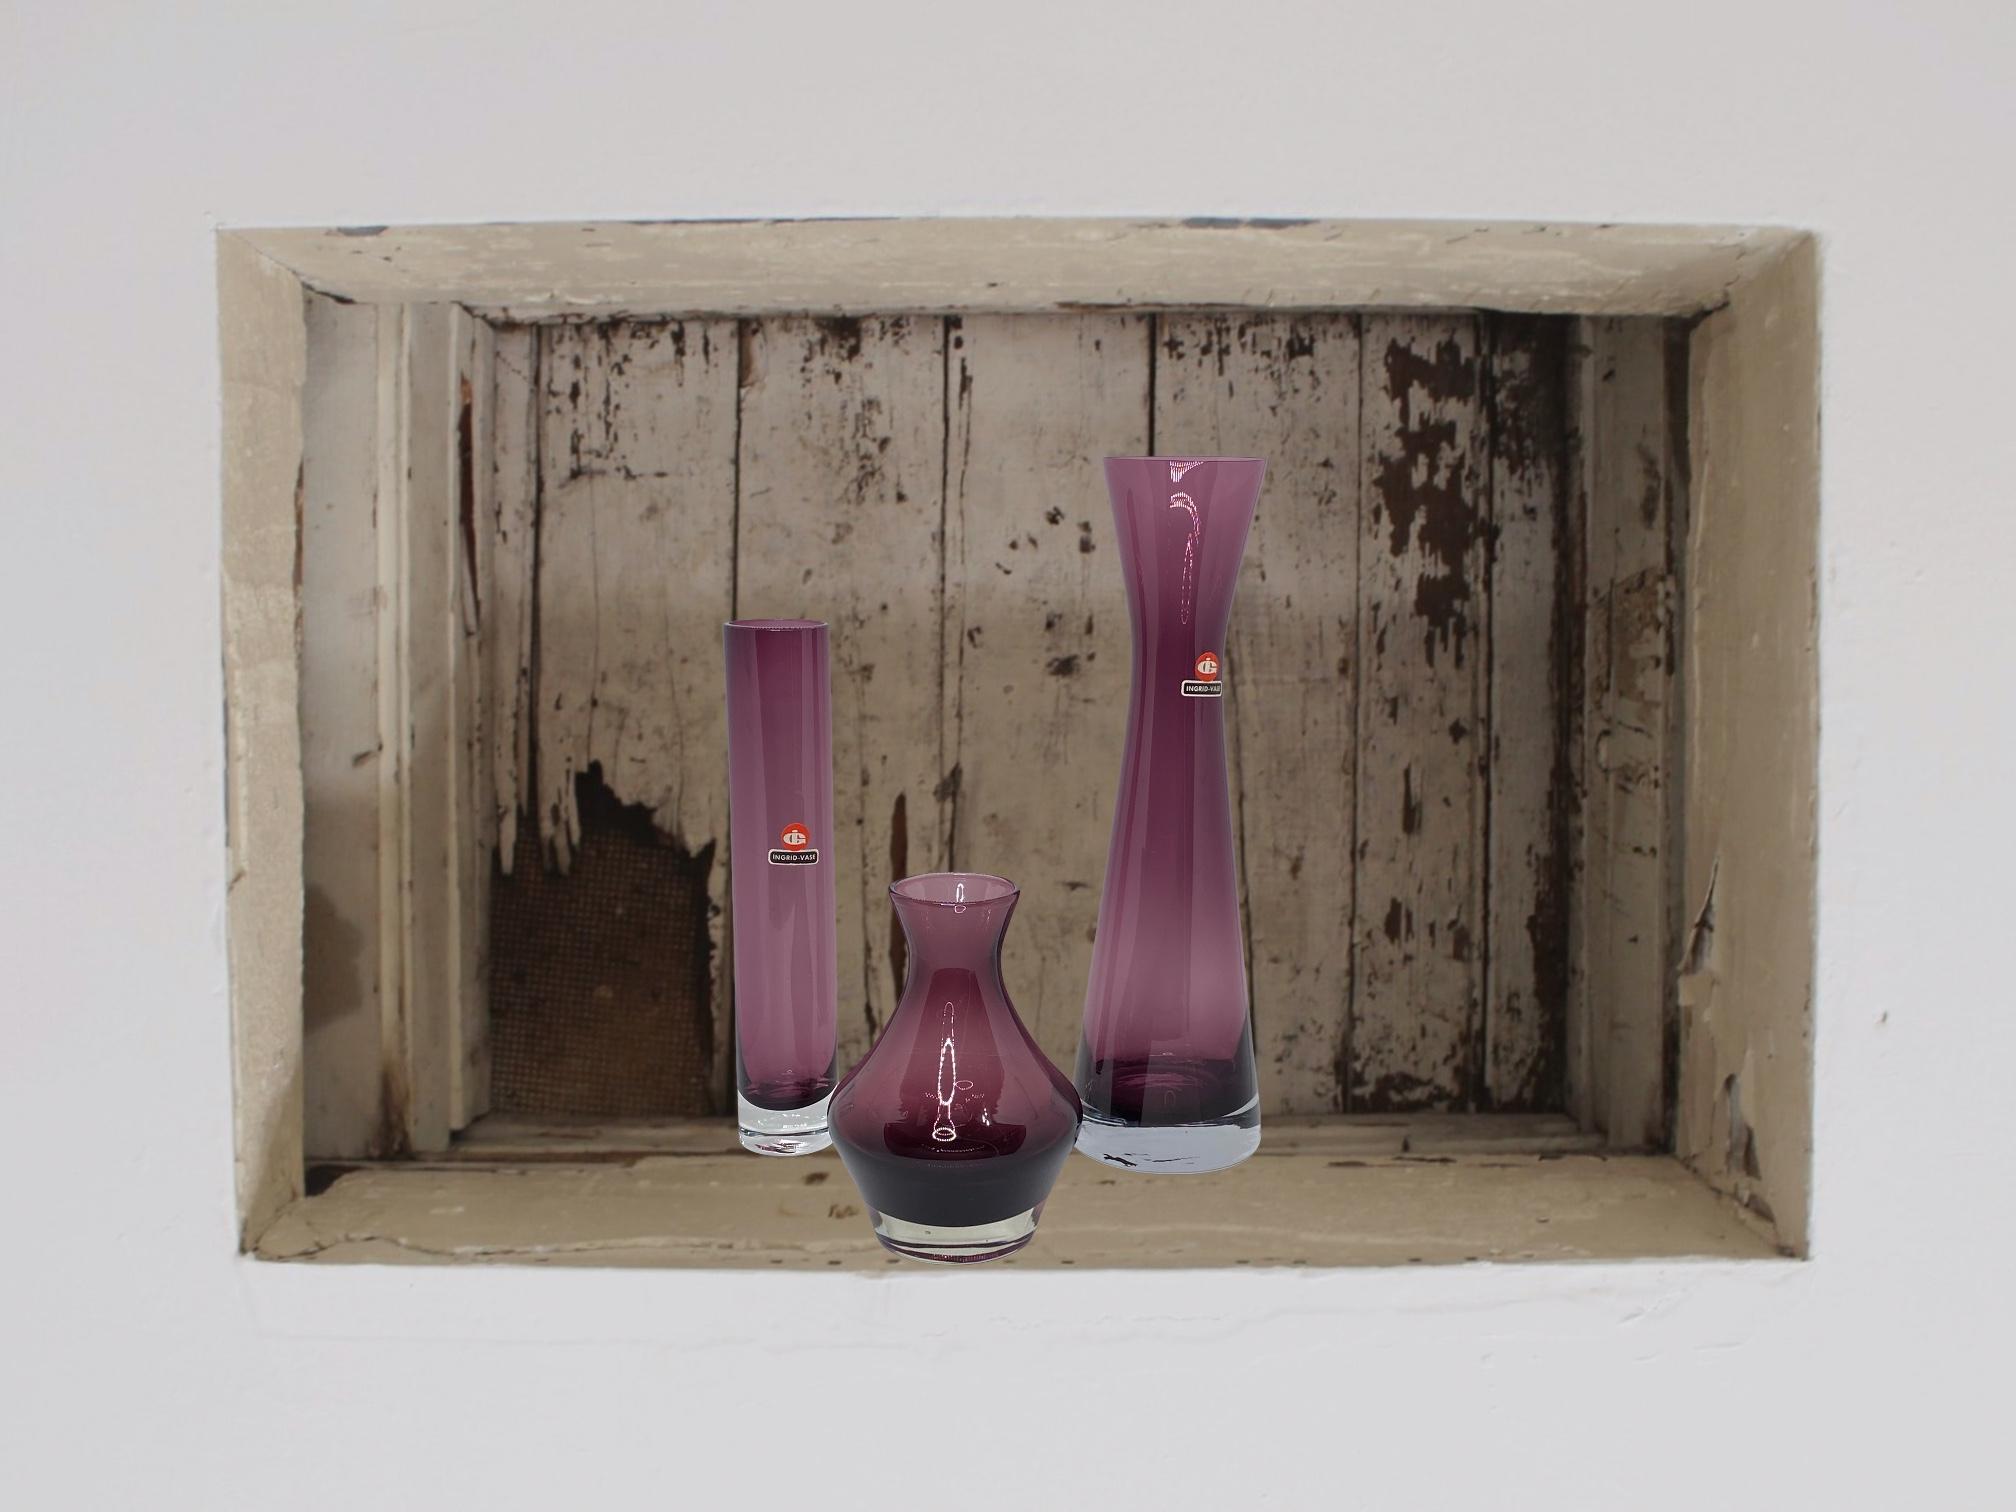 Wonderful Mid-Century Modern German vases by Ingrid Glass, circa 1970. These beautiful purple colored and clear vases bring a touch of elegance and fantasy to any room. Tallest one is approximate 11